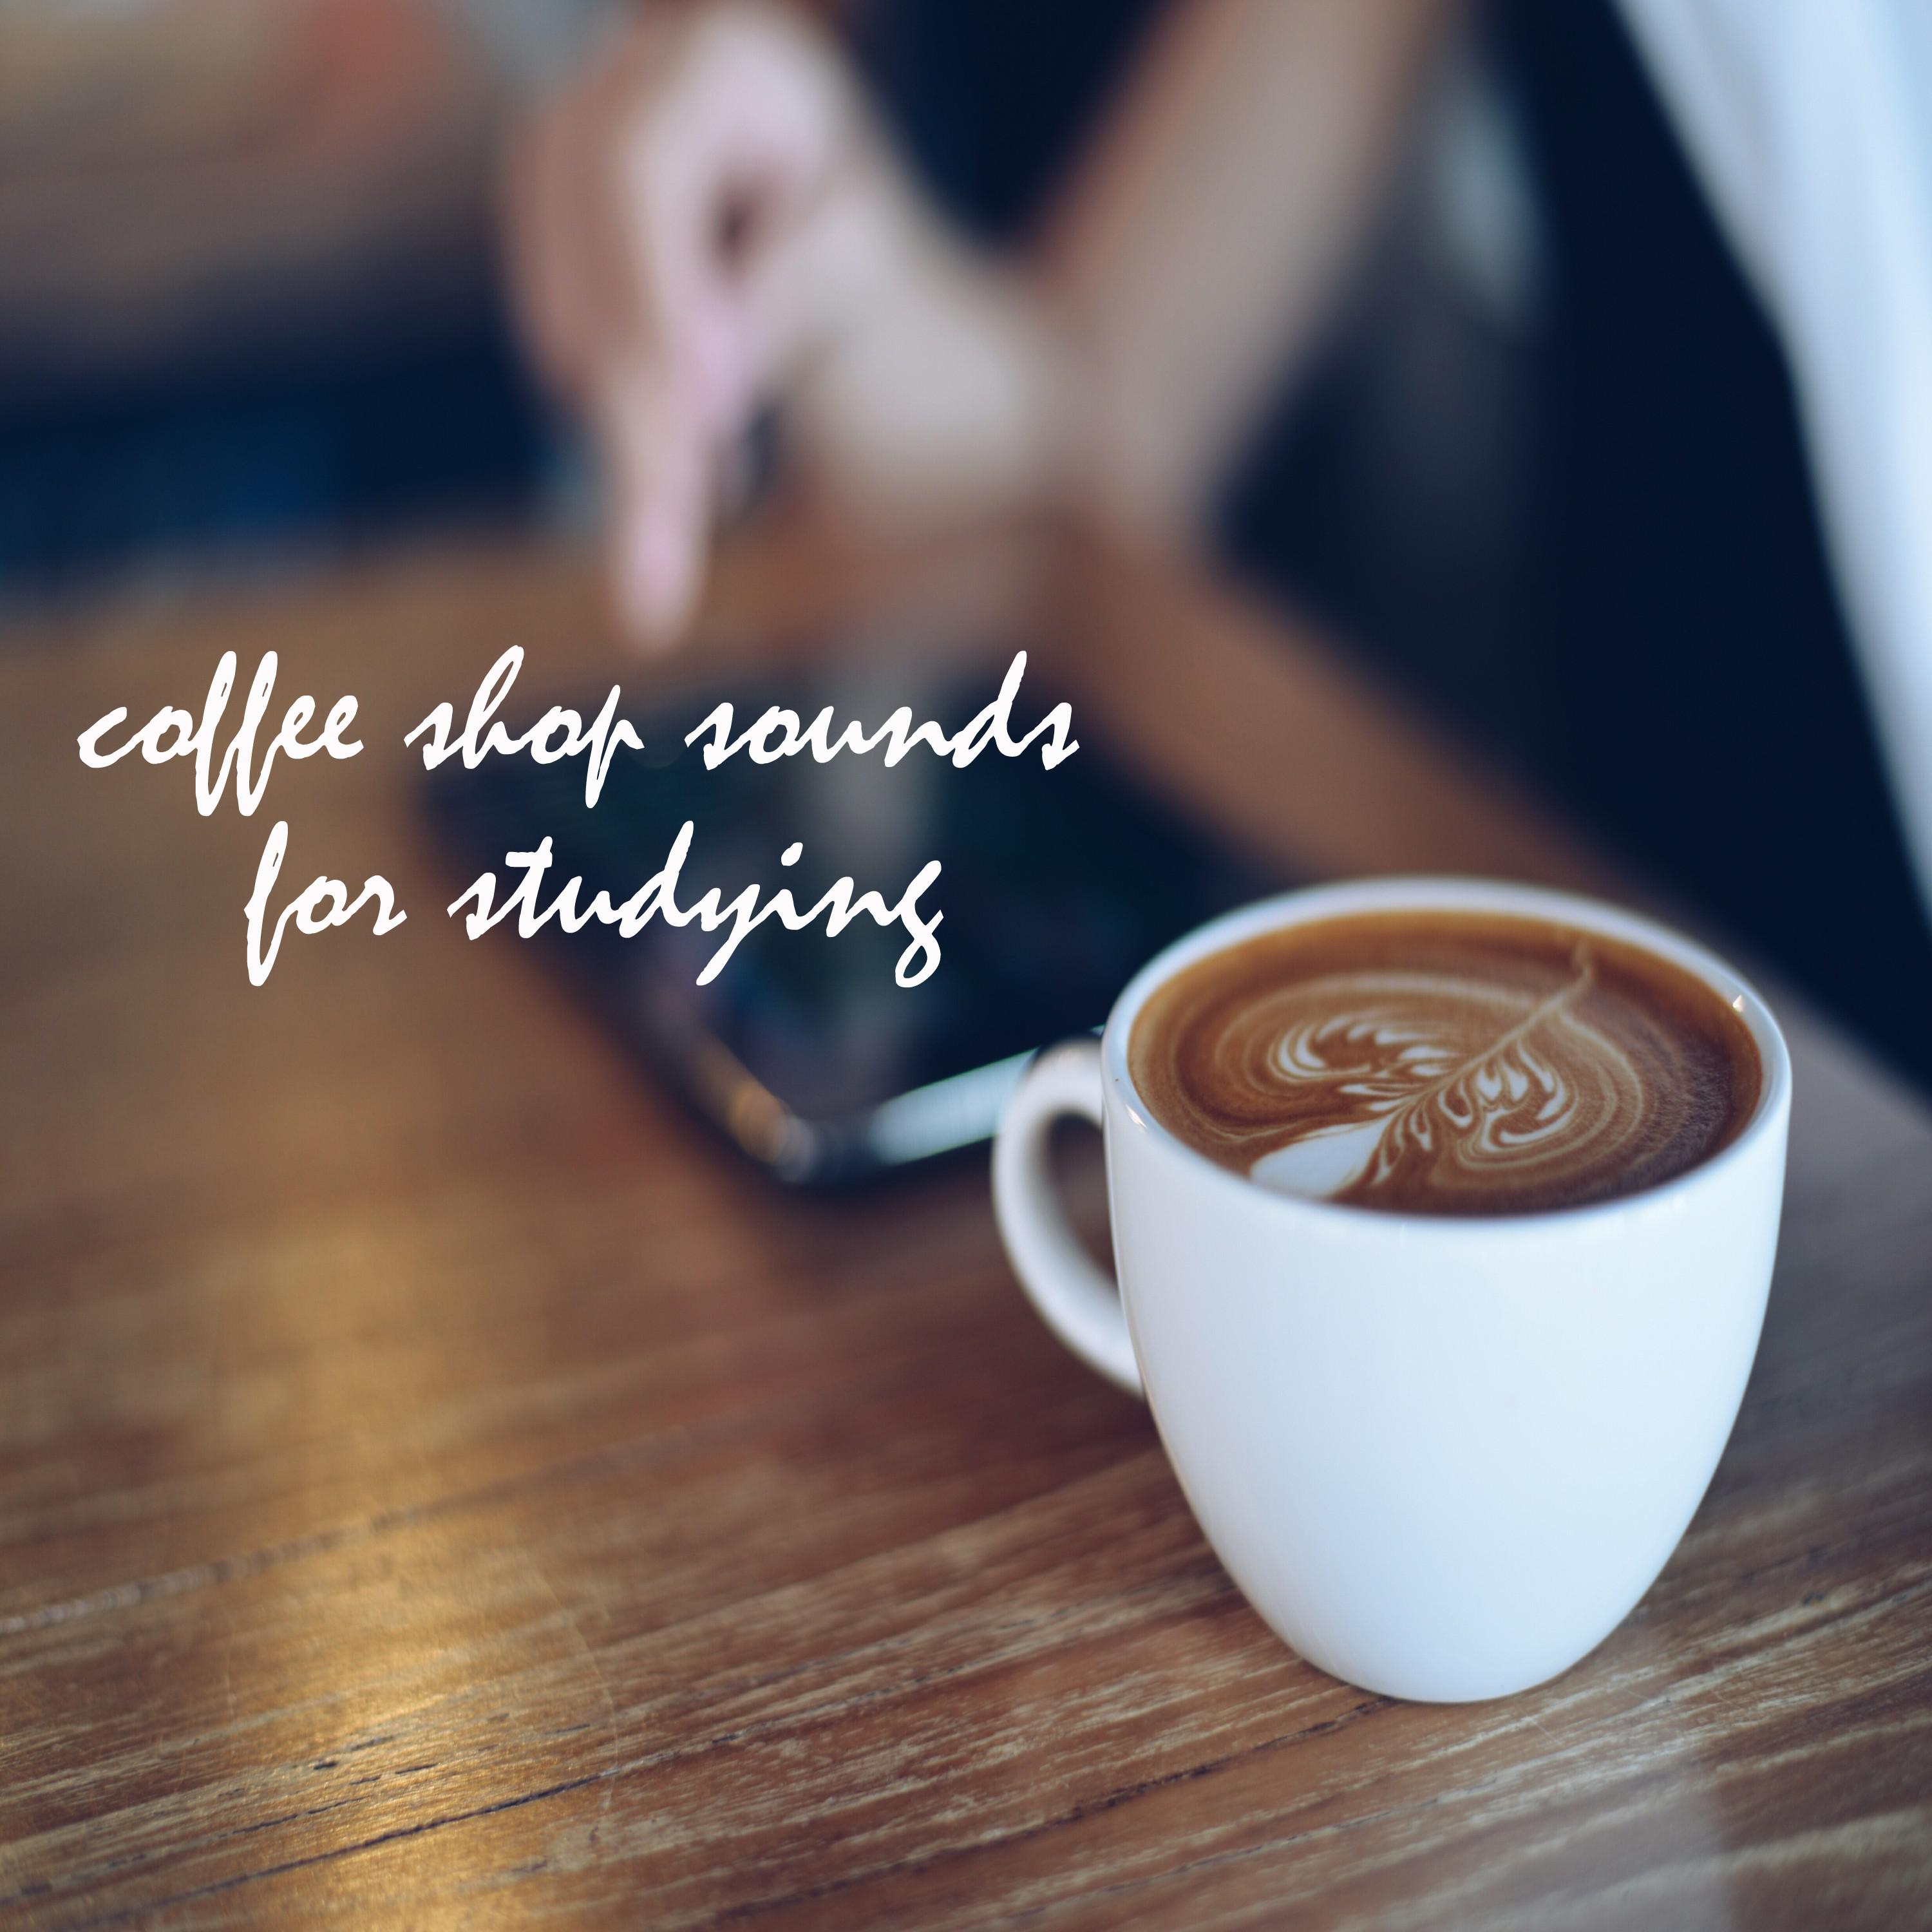 Coffee Shop Sounds for Studying and Working, Pt. 45